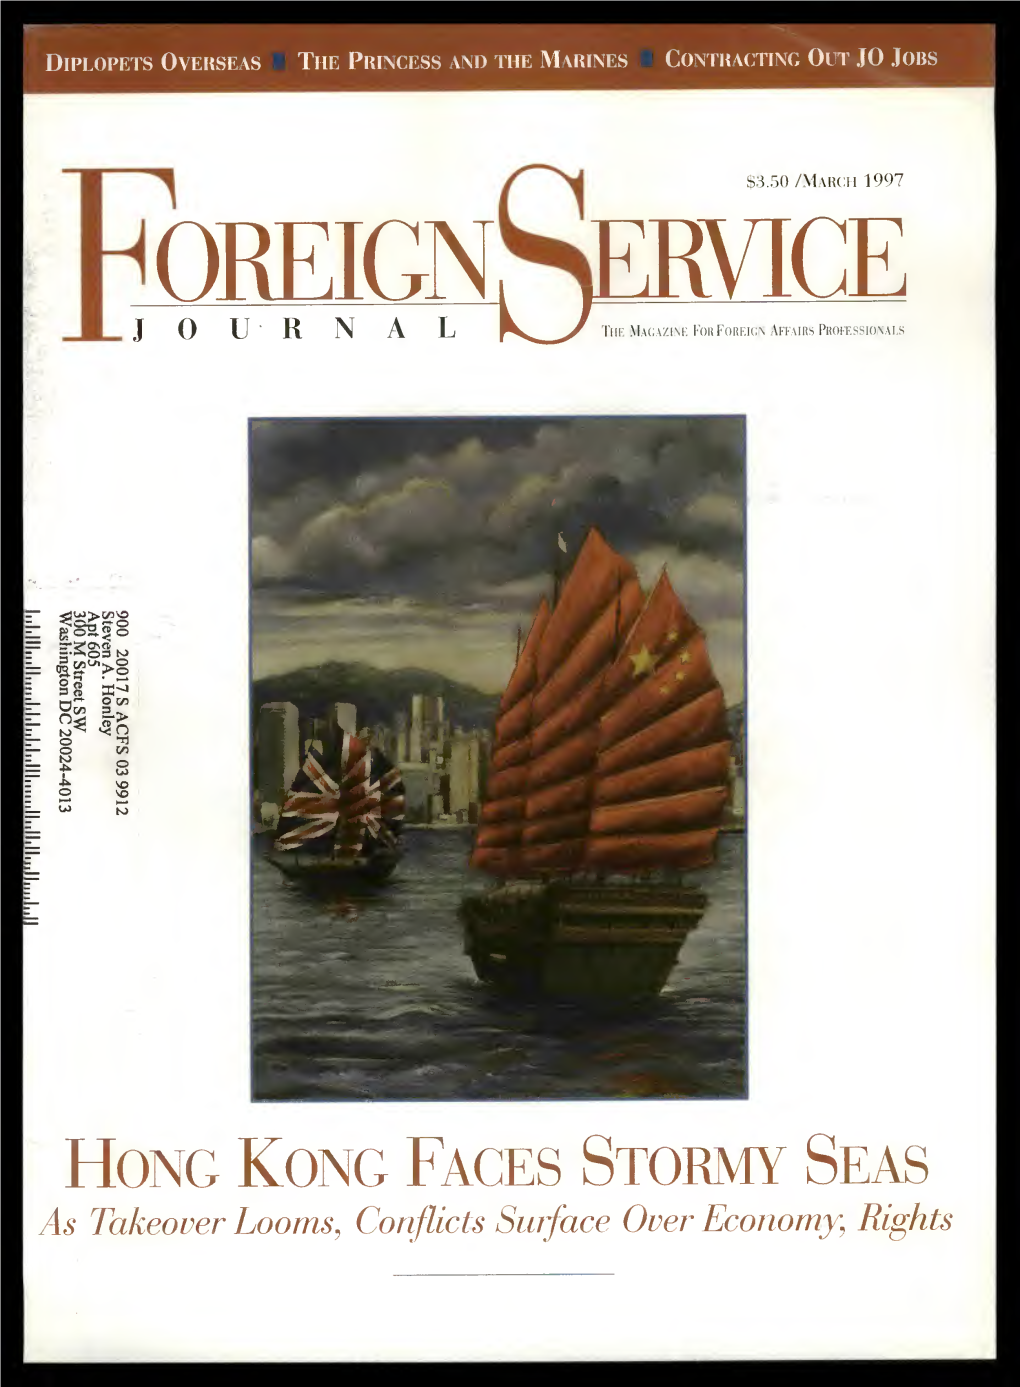 The Foreign Service Journal, March 1997